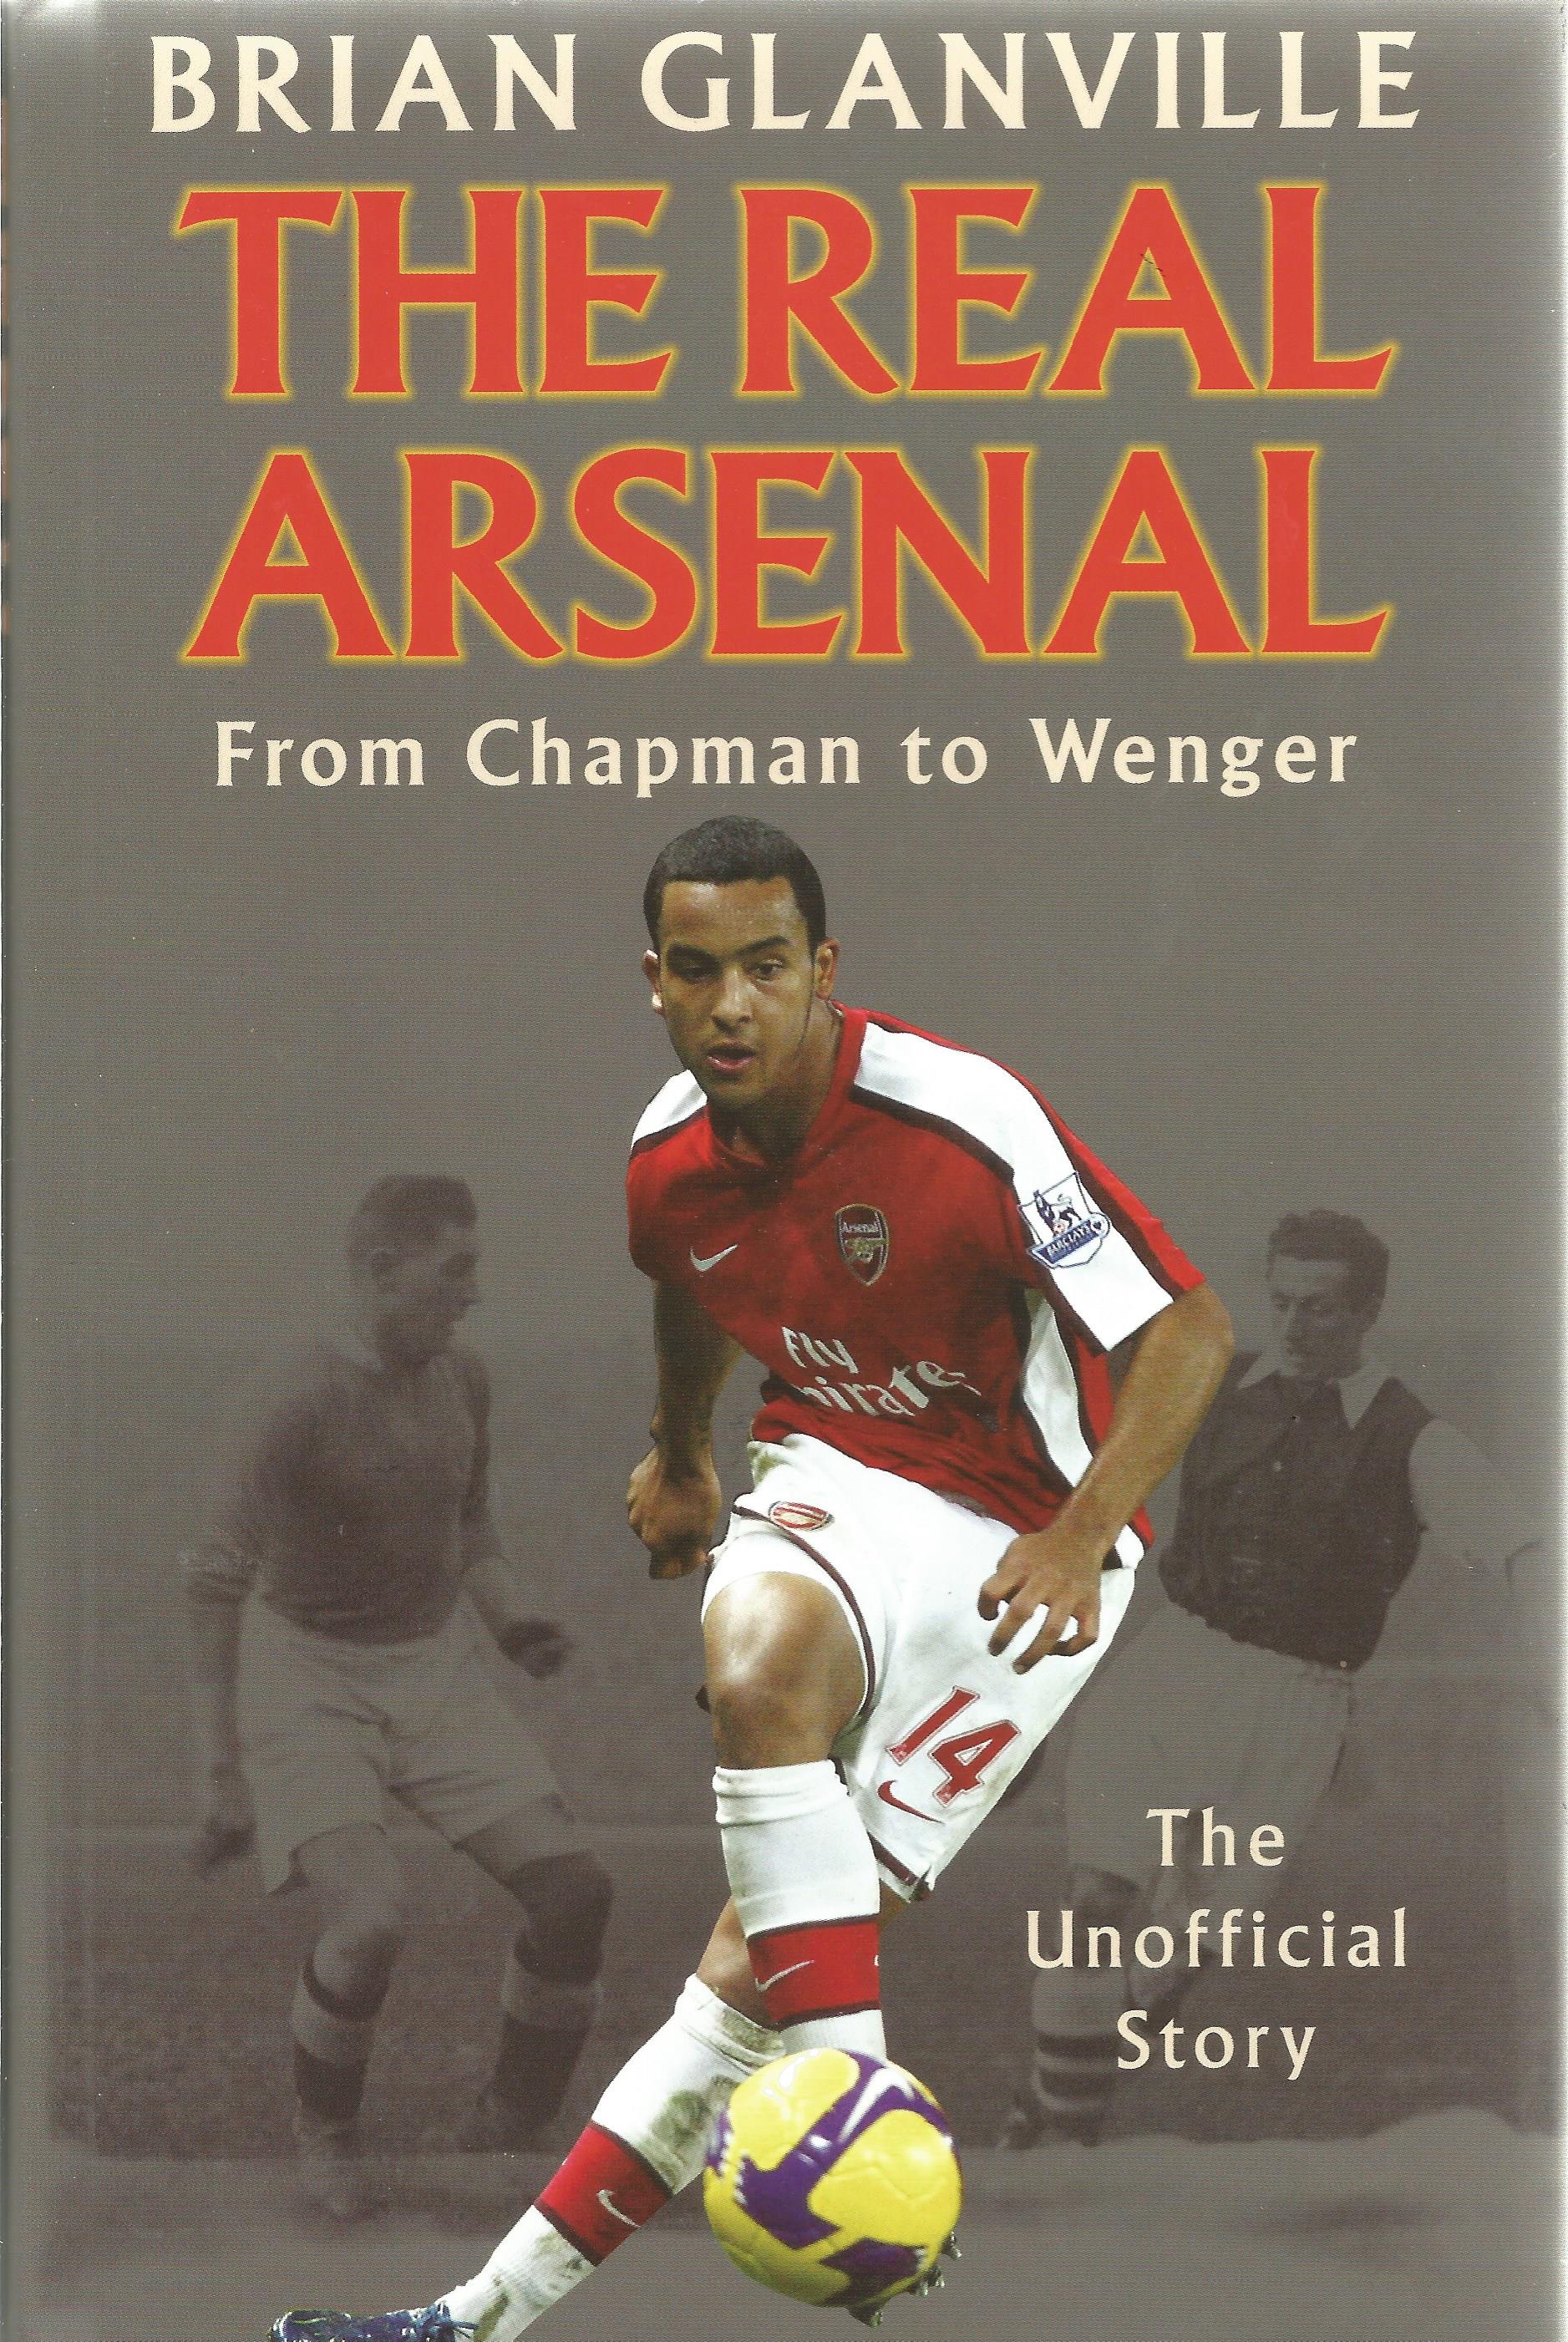 The Real Arsenal From Chapman To Wenger by Brian Glanville. First Edition Hardback book. Spine and